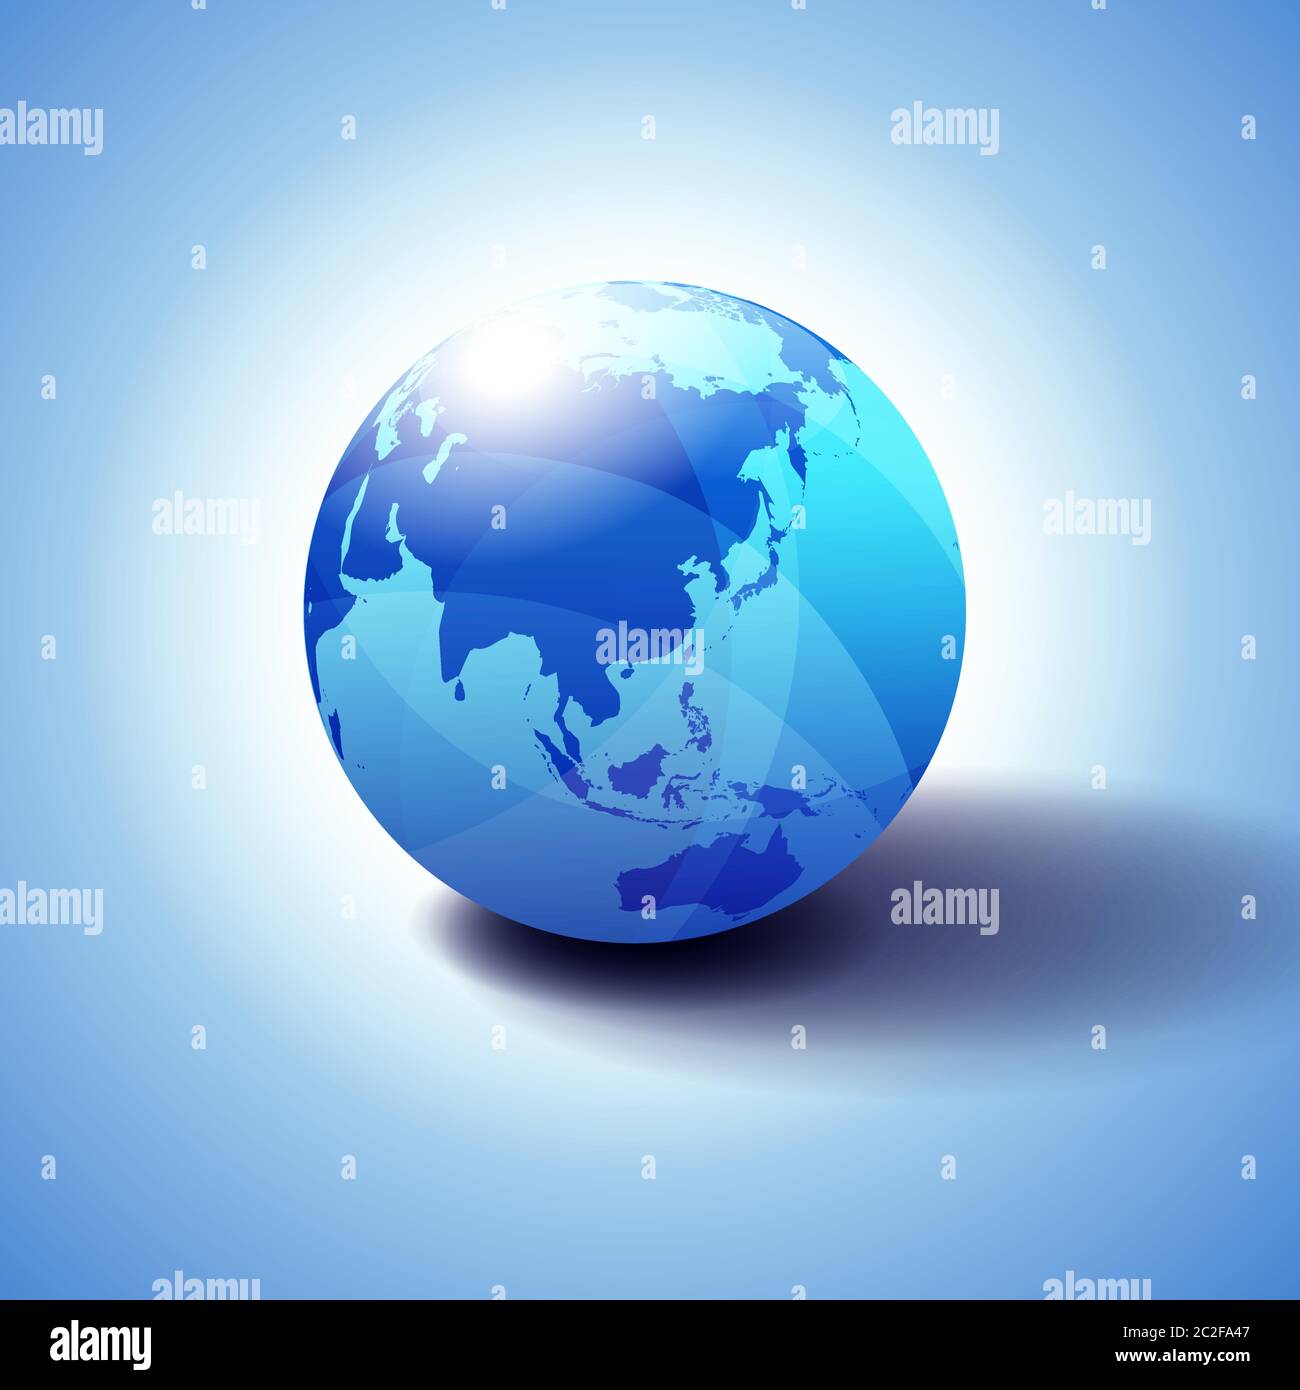 China Korea Japan Pacific, Background with Globe Icon 3D illustration, Glossy, Shiny Sphere with Global Map in Subtle Blues giving a transparent feel. Stock Vector